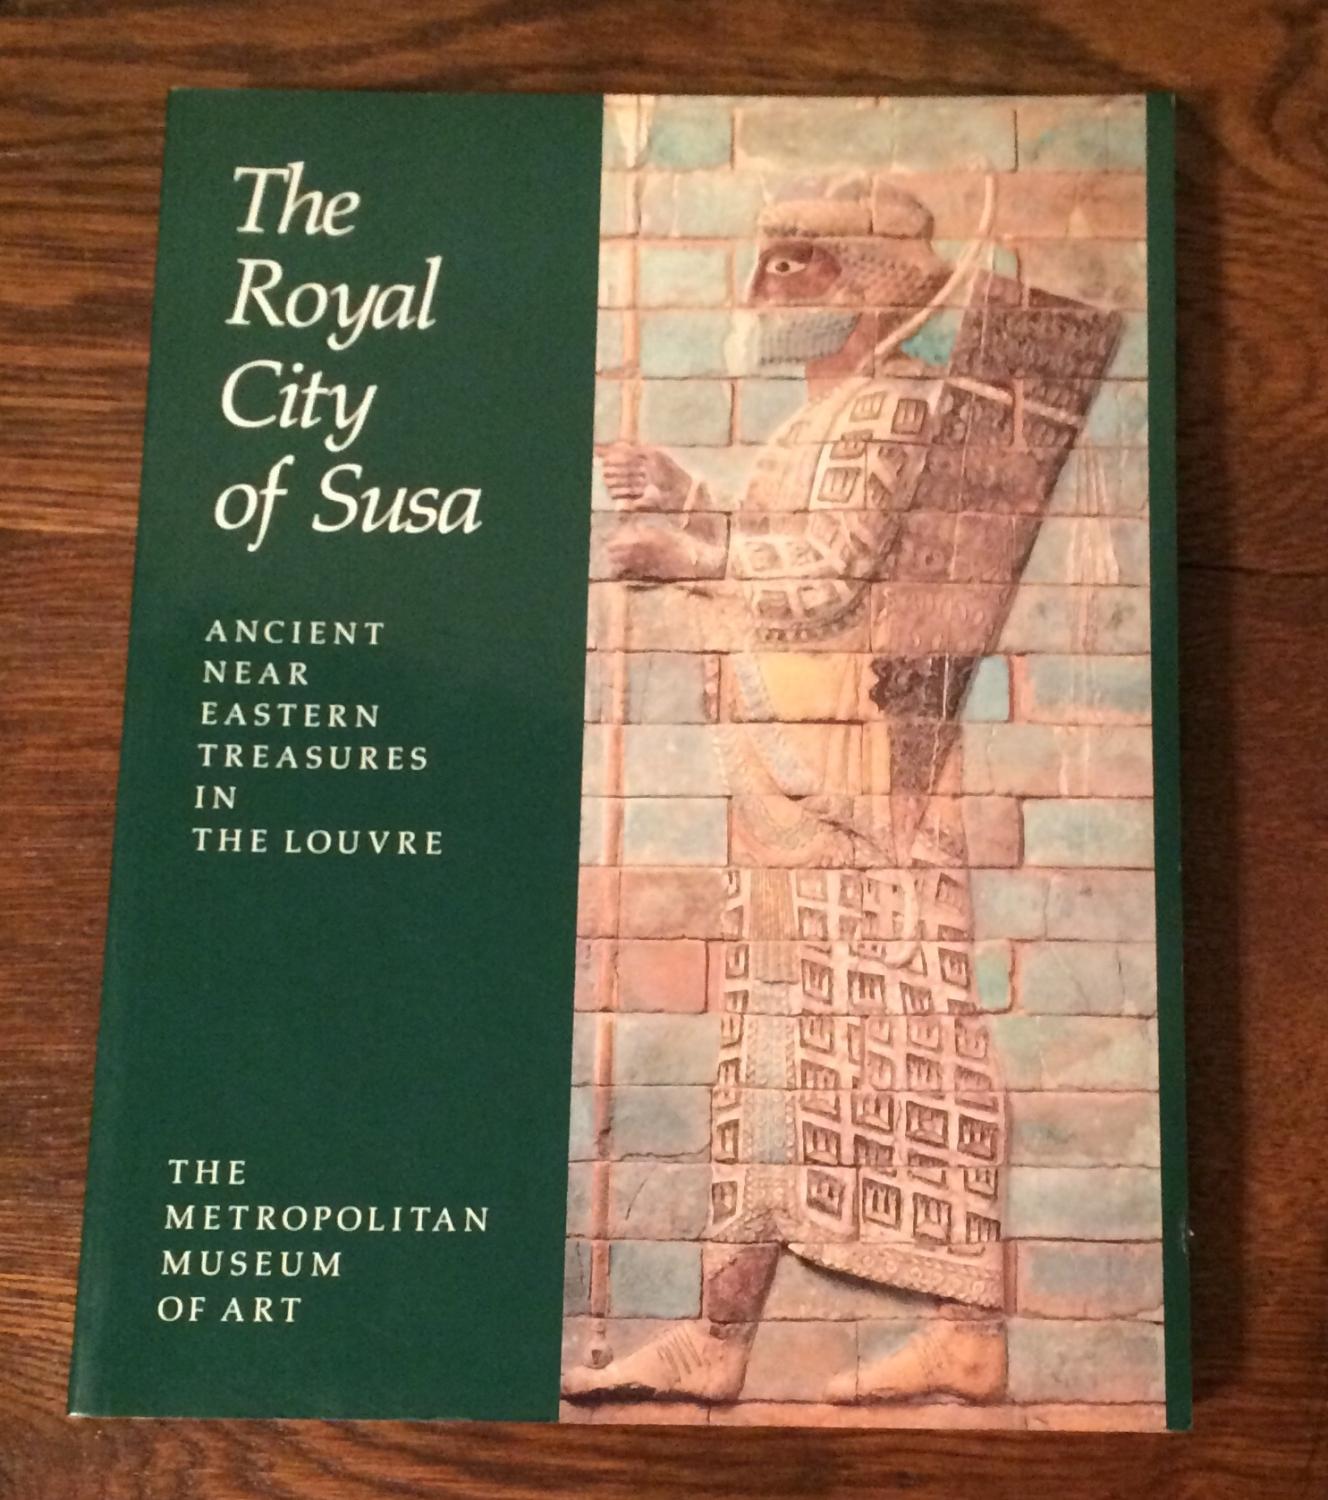 The Royal City of Susa. Ancient Near Eastern Treasures in the Louvre - Prudence O. Haper, Joan Aruz, Francoise Tallon